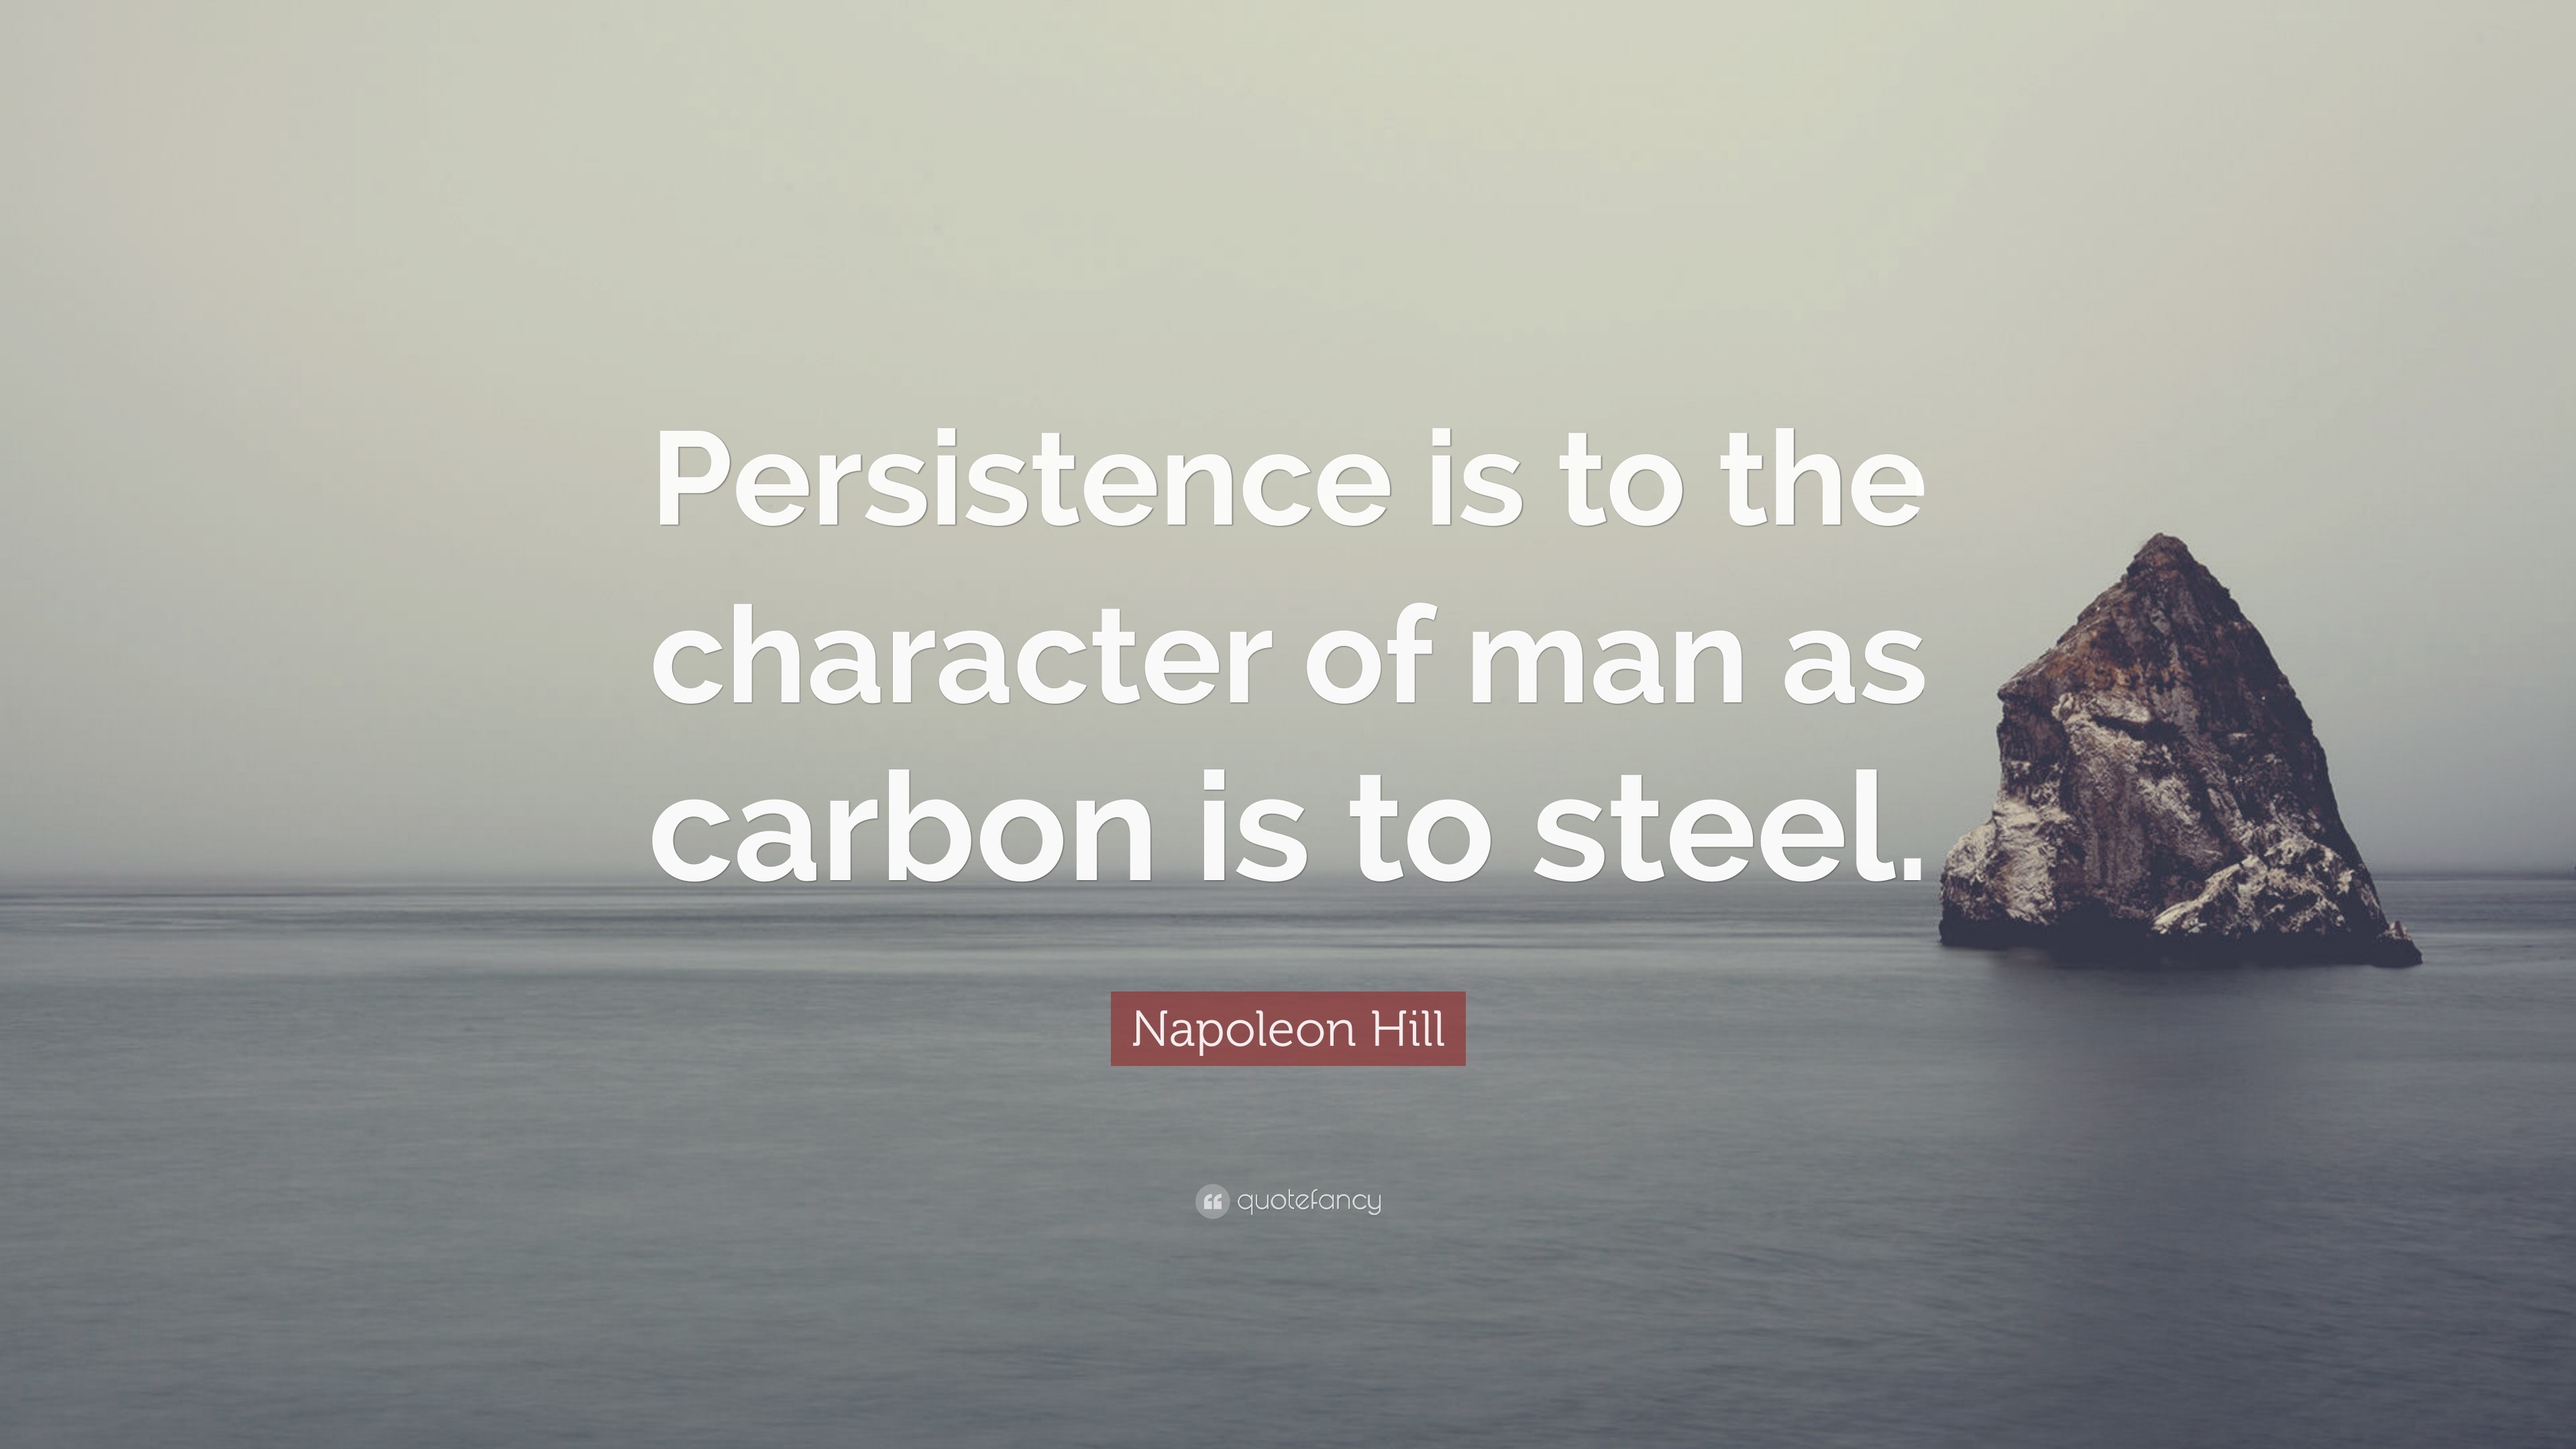 Napoleon Hill Quote: “Persistence is to the character of man as carbon ...